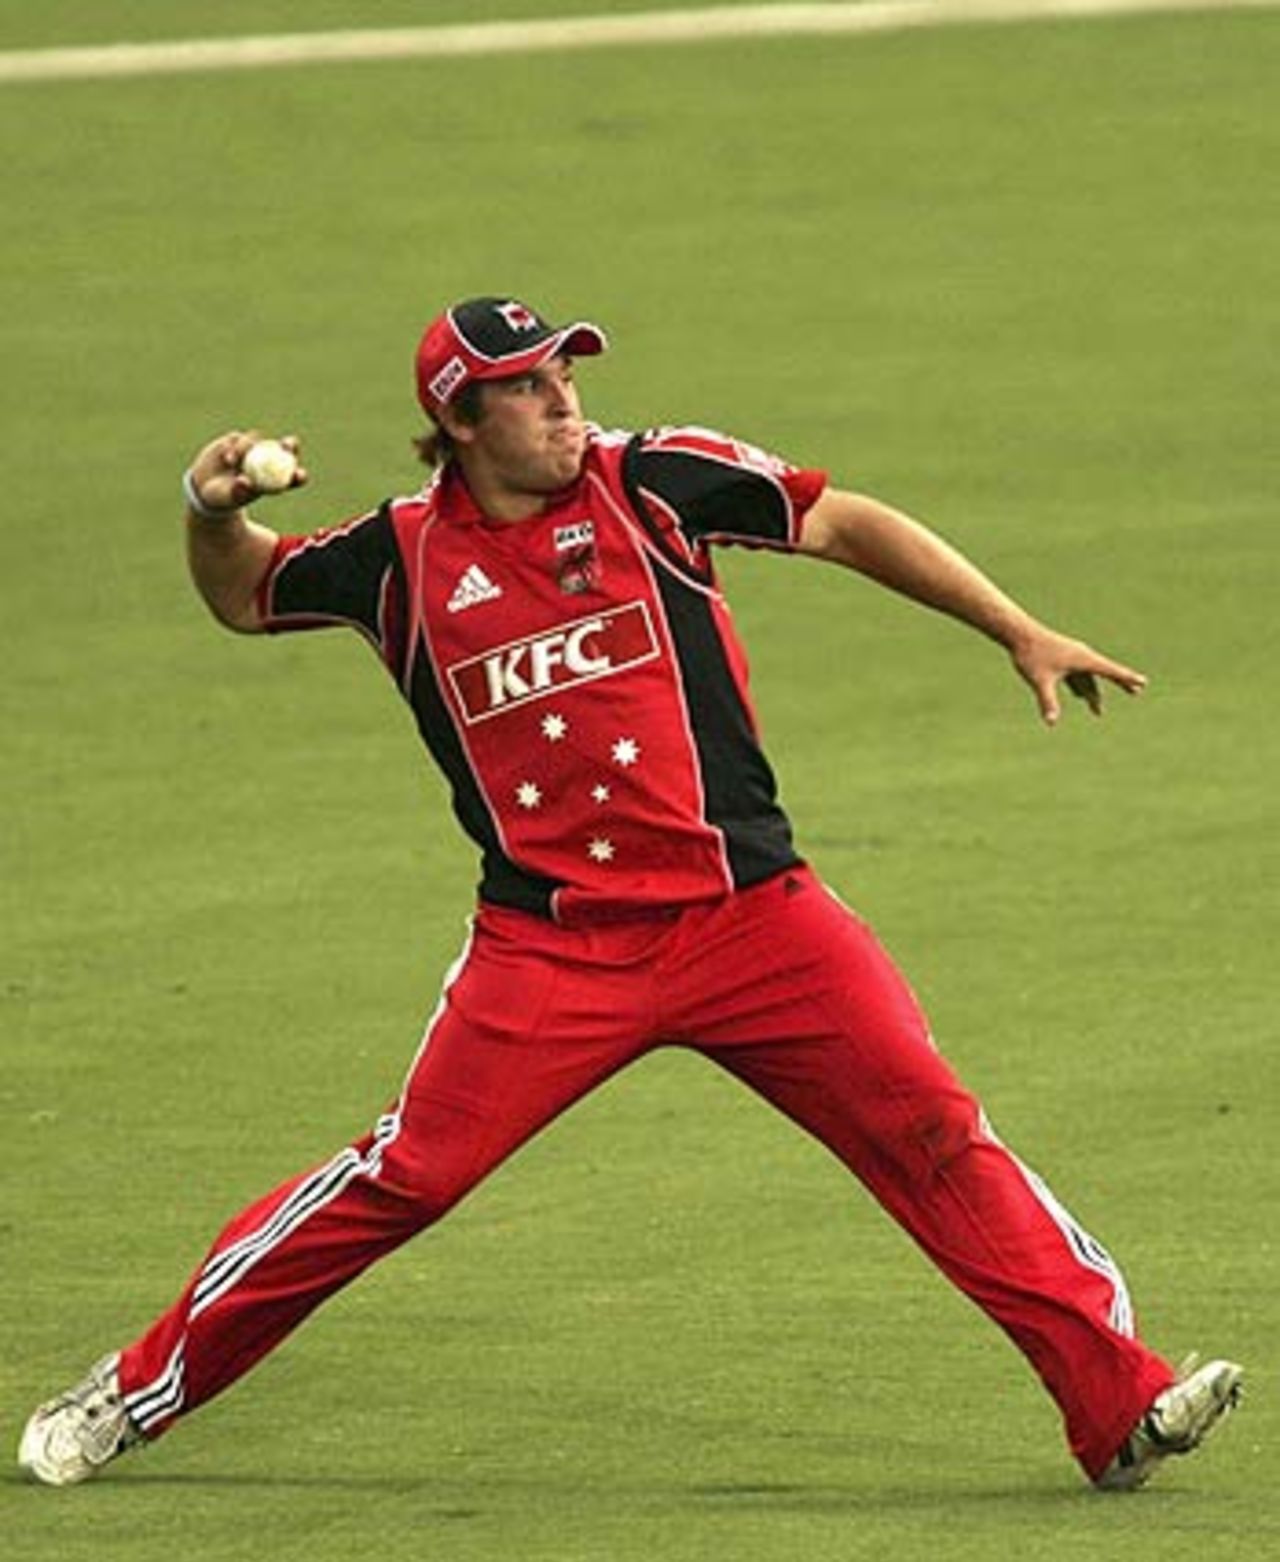 Mark Cosgrove fires in a throw from the deep, South Australia v Western Australia, Australian Twenty20 Competition, Group A, Adelaide, January 10, 2006